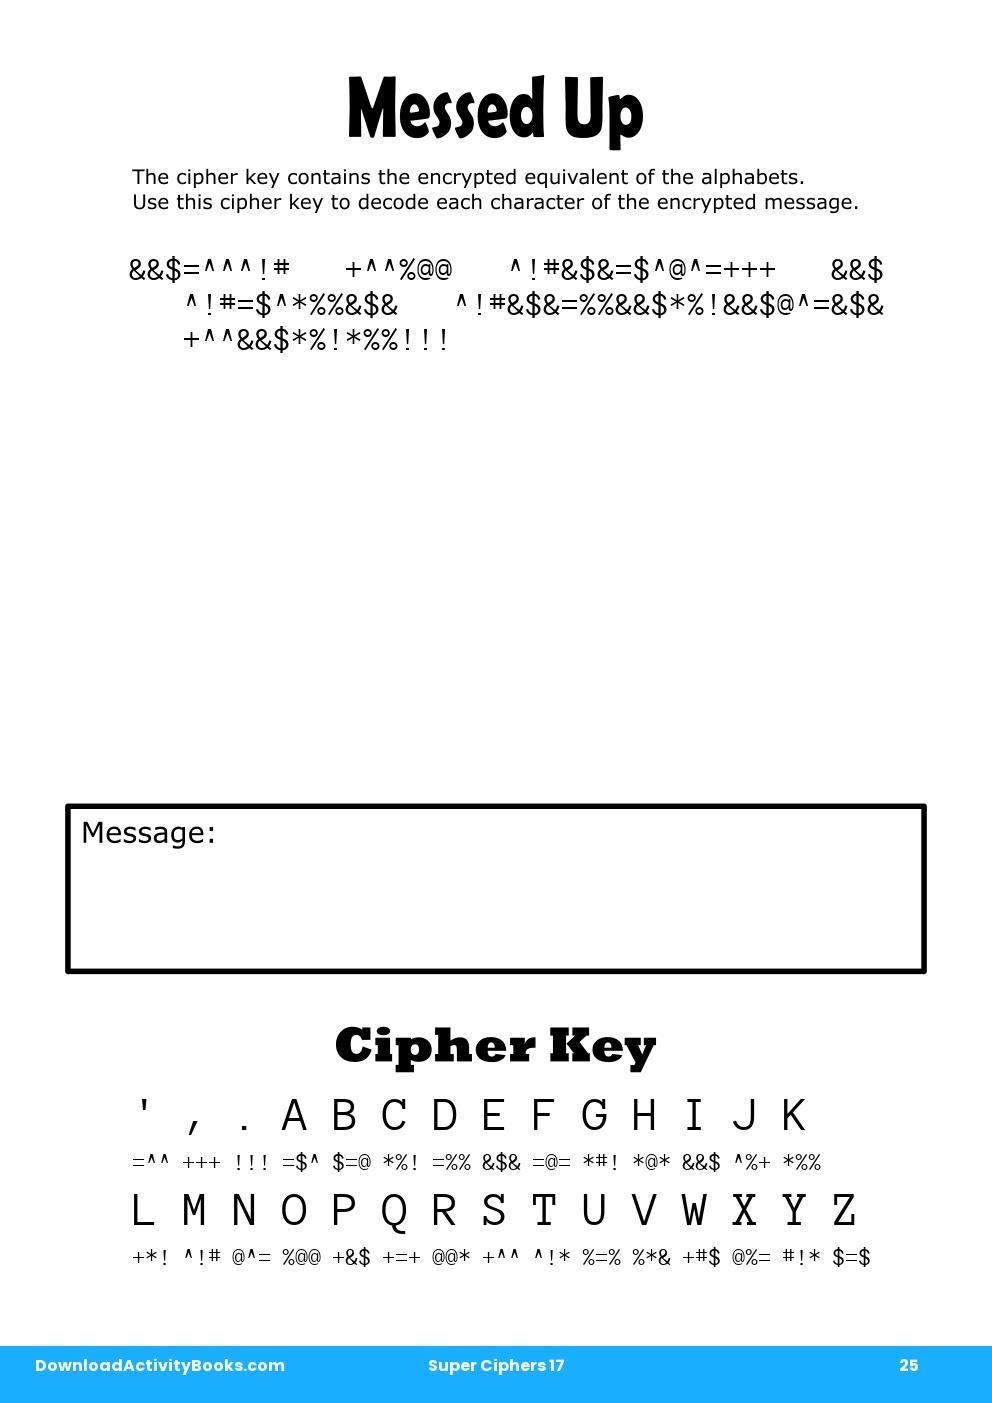 Messed Up in Super Ciphers 17